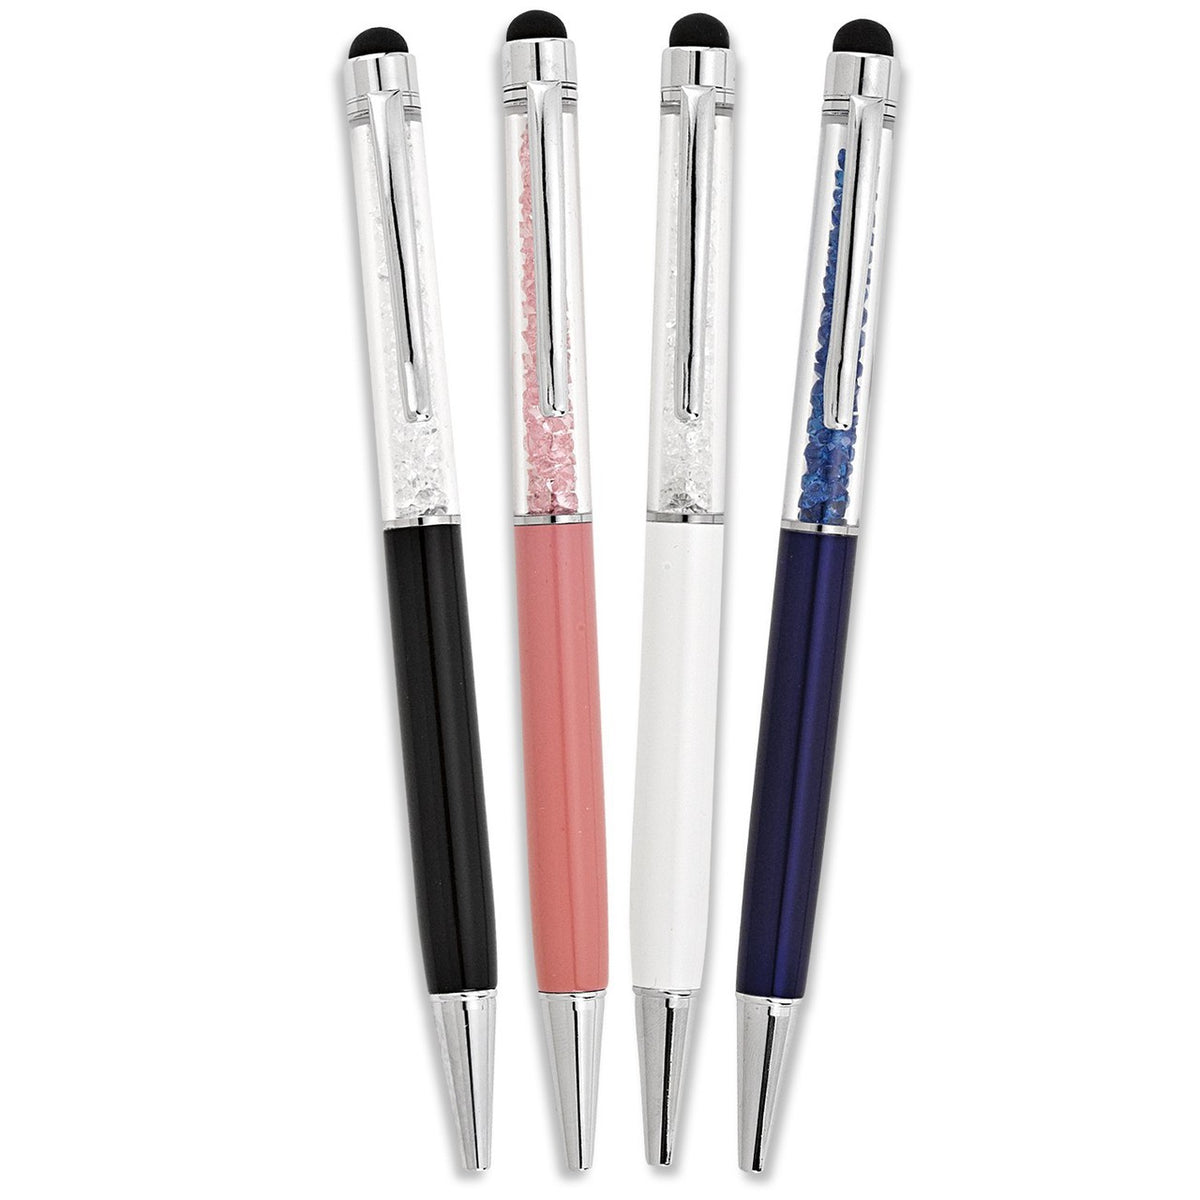 Crystalized Pen Stylus Set 4 pc with 2 In kRefills